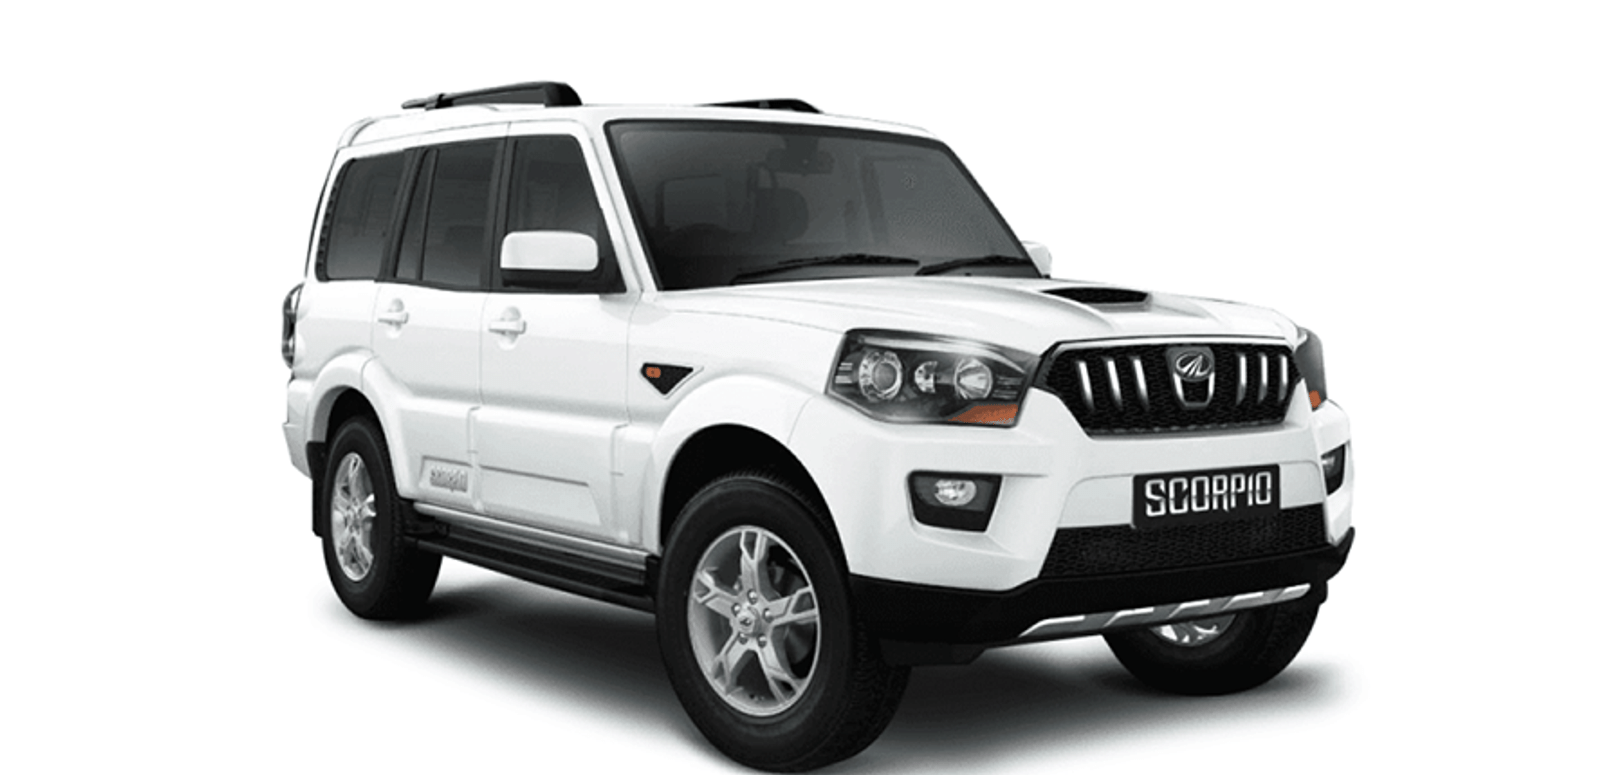 Self Drive Cars In Bangalore For Rent, Hire Car @ 18% Off